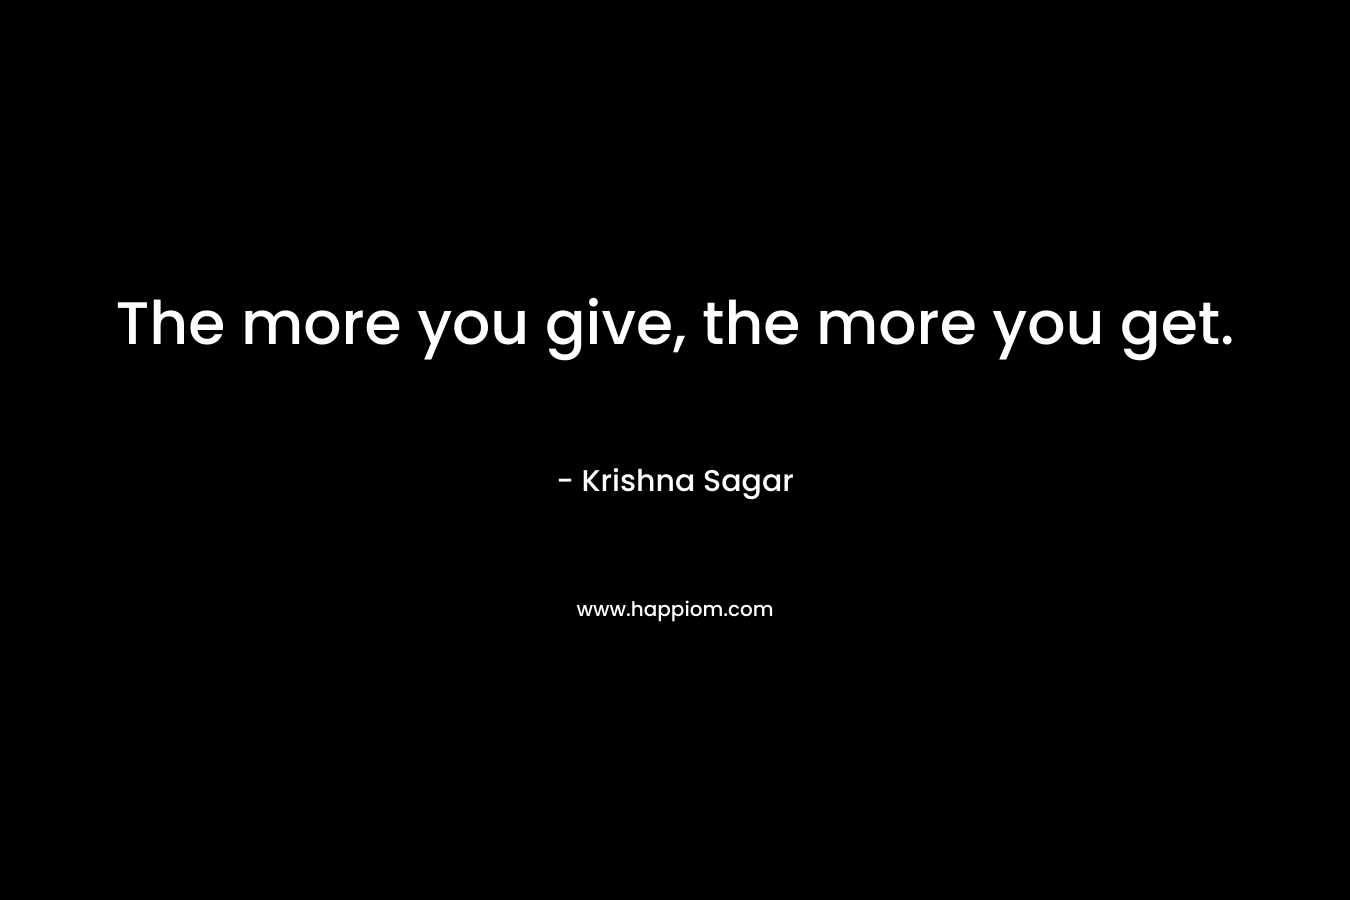 The more you give, the more you get. – Krishna Sagar